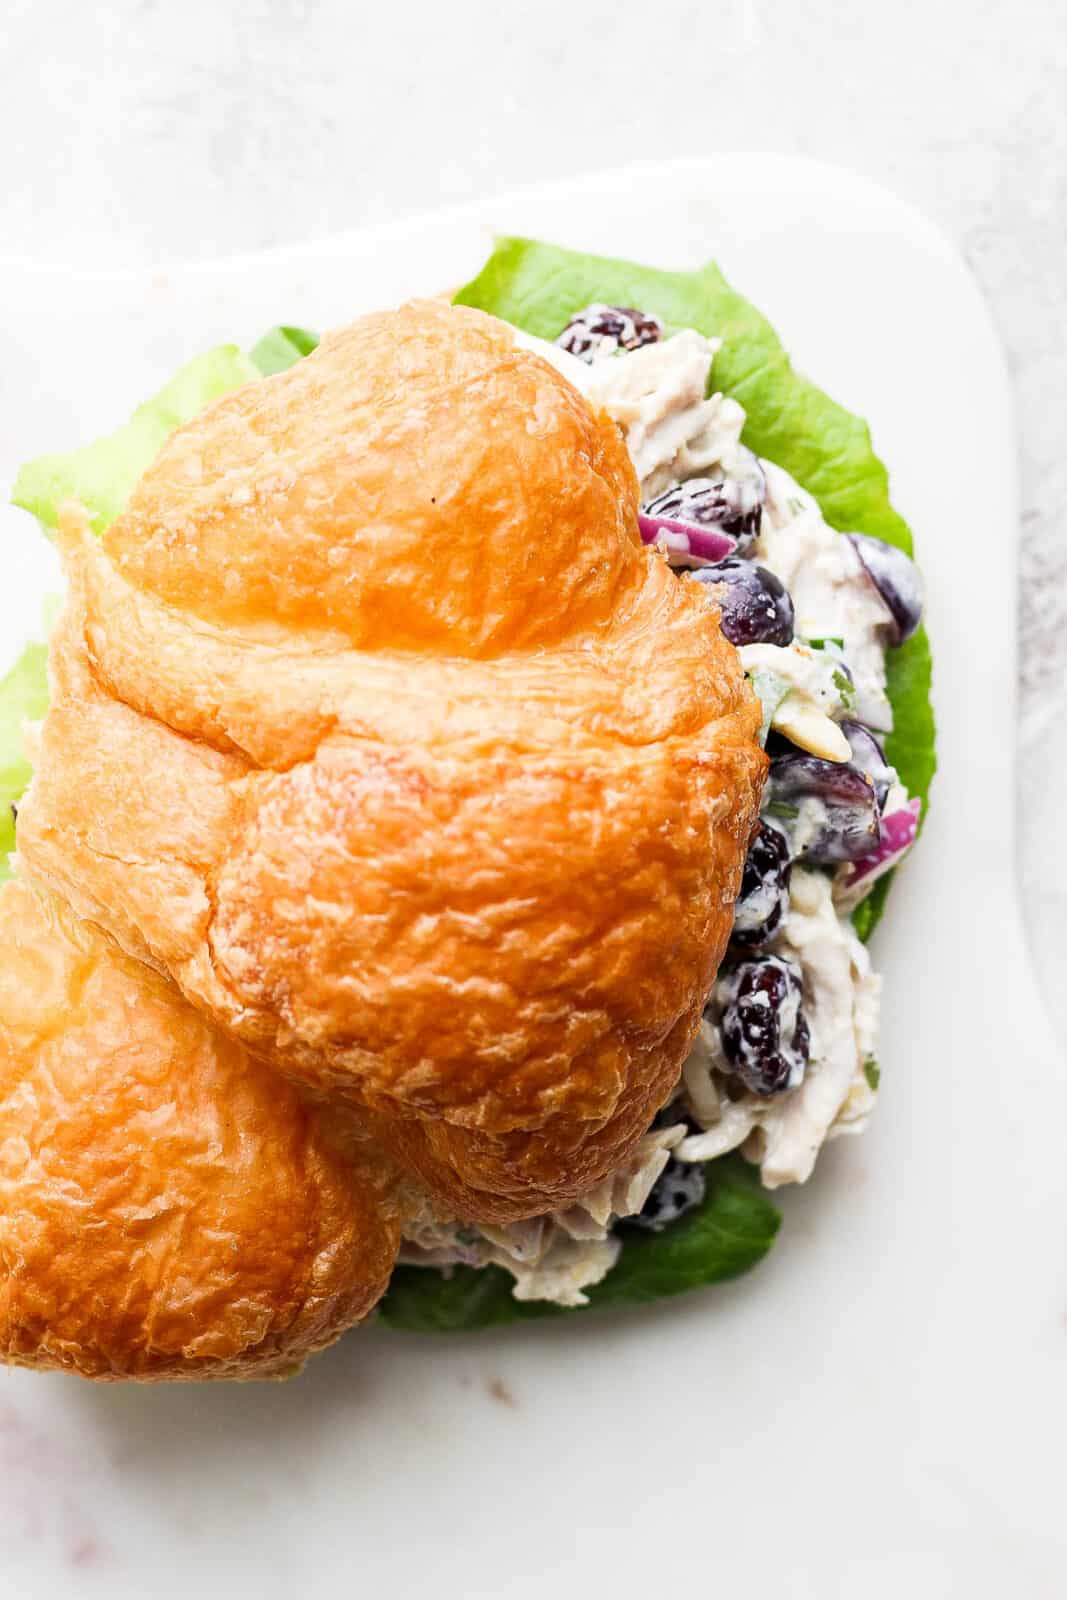 Smoked chicken salad on a croissant from the top view. 